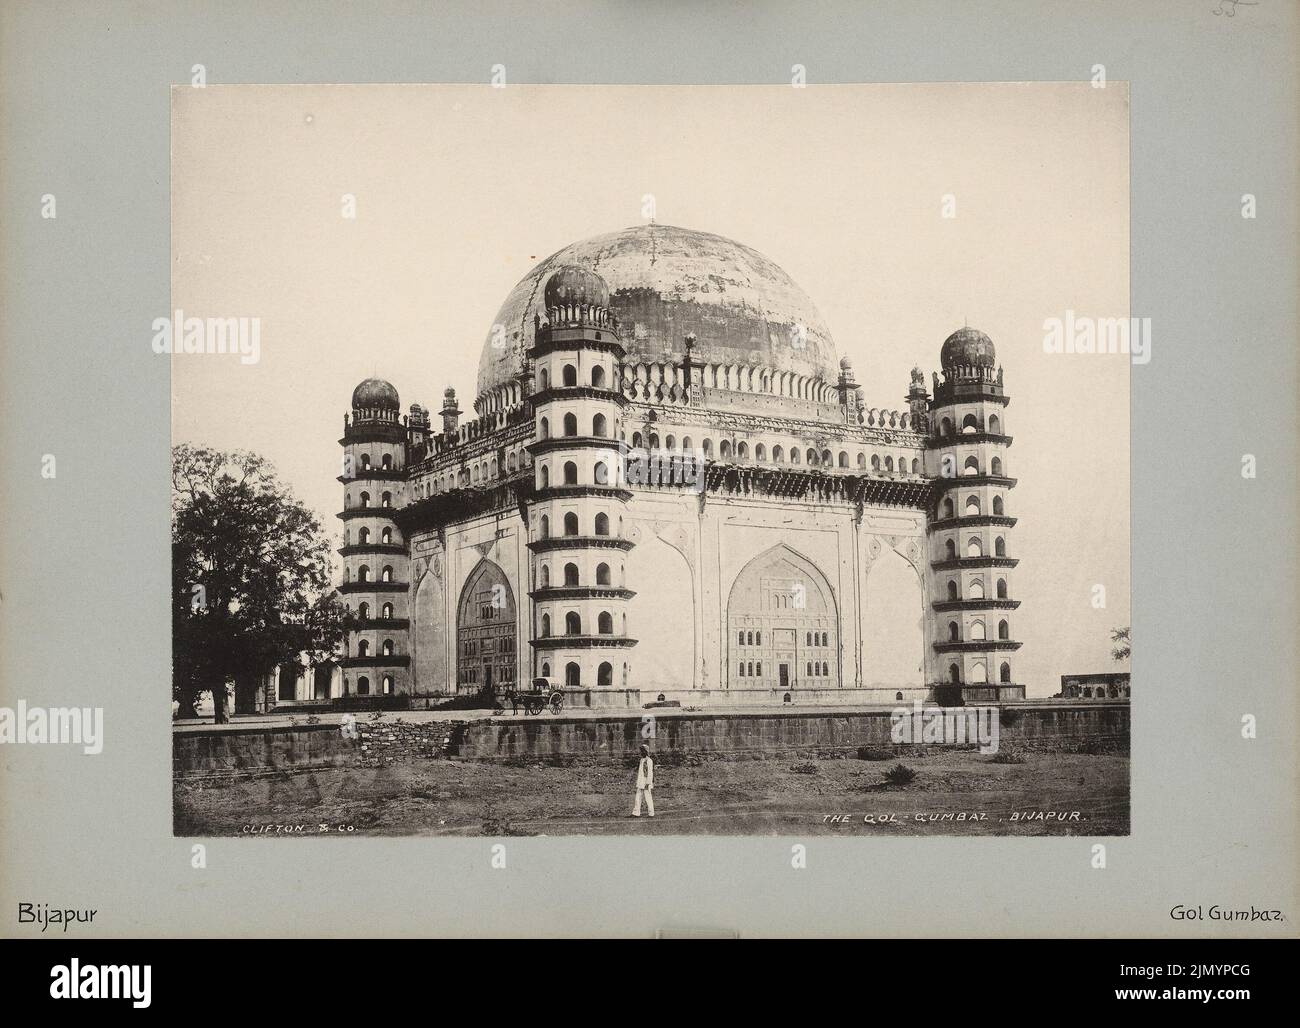 Clifton & Co., Gol Gumbaz, Bijapur (without Dat.): View of the quadratic dome building flanked by octagonal corner towers with keel arch portals, built in 1659, Mausoleum by Mohamed Adil Shah (1626-. Photo, 23.6 x 32.7 cm ( including scan edges) Stock Photo